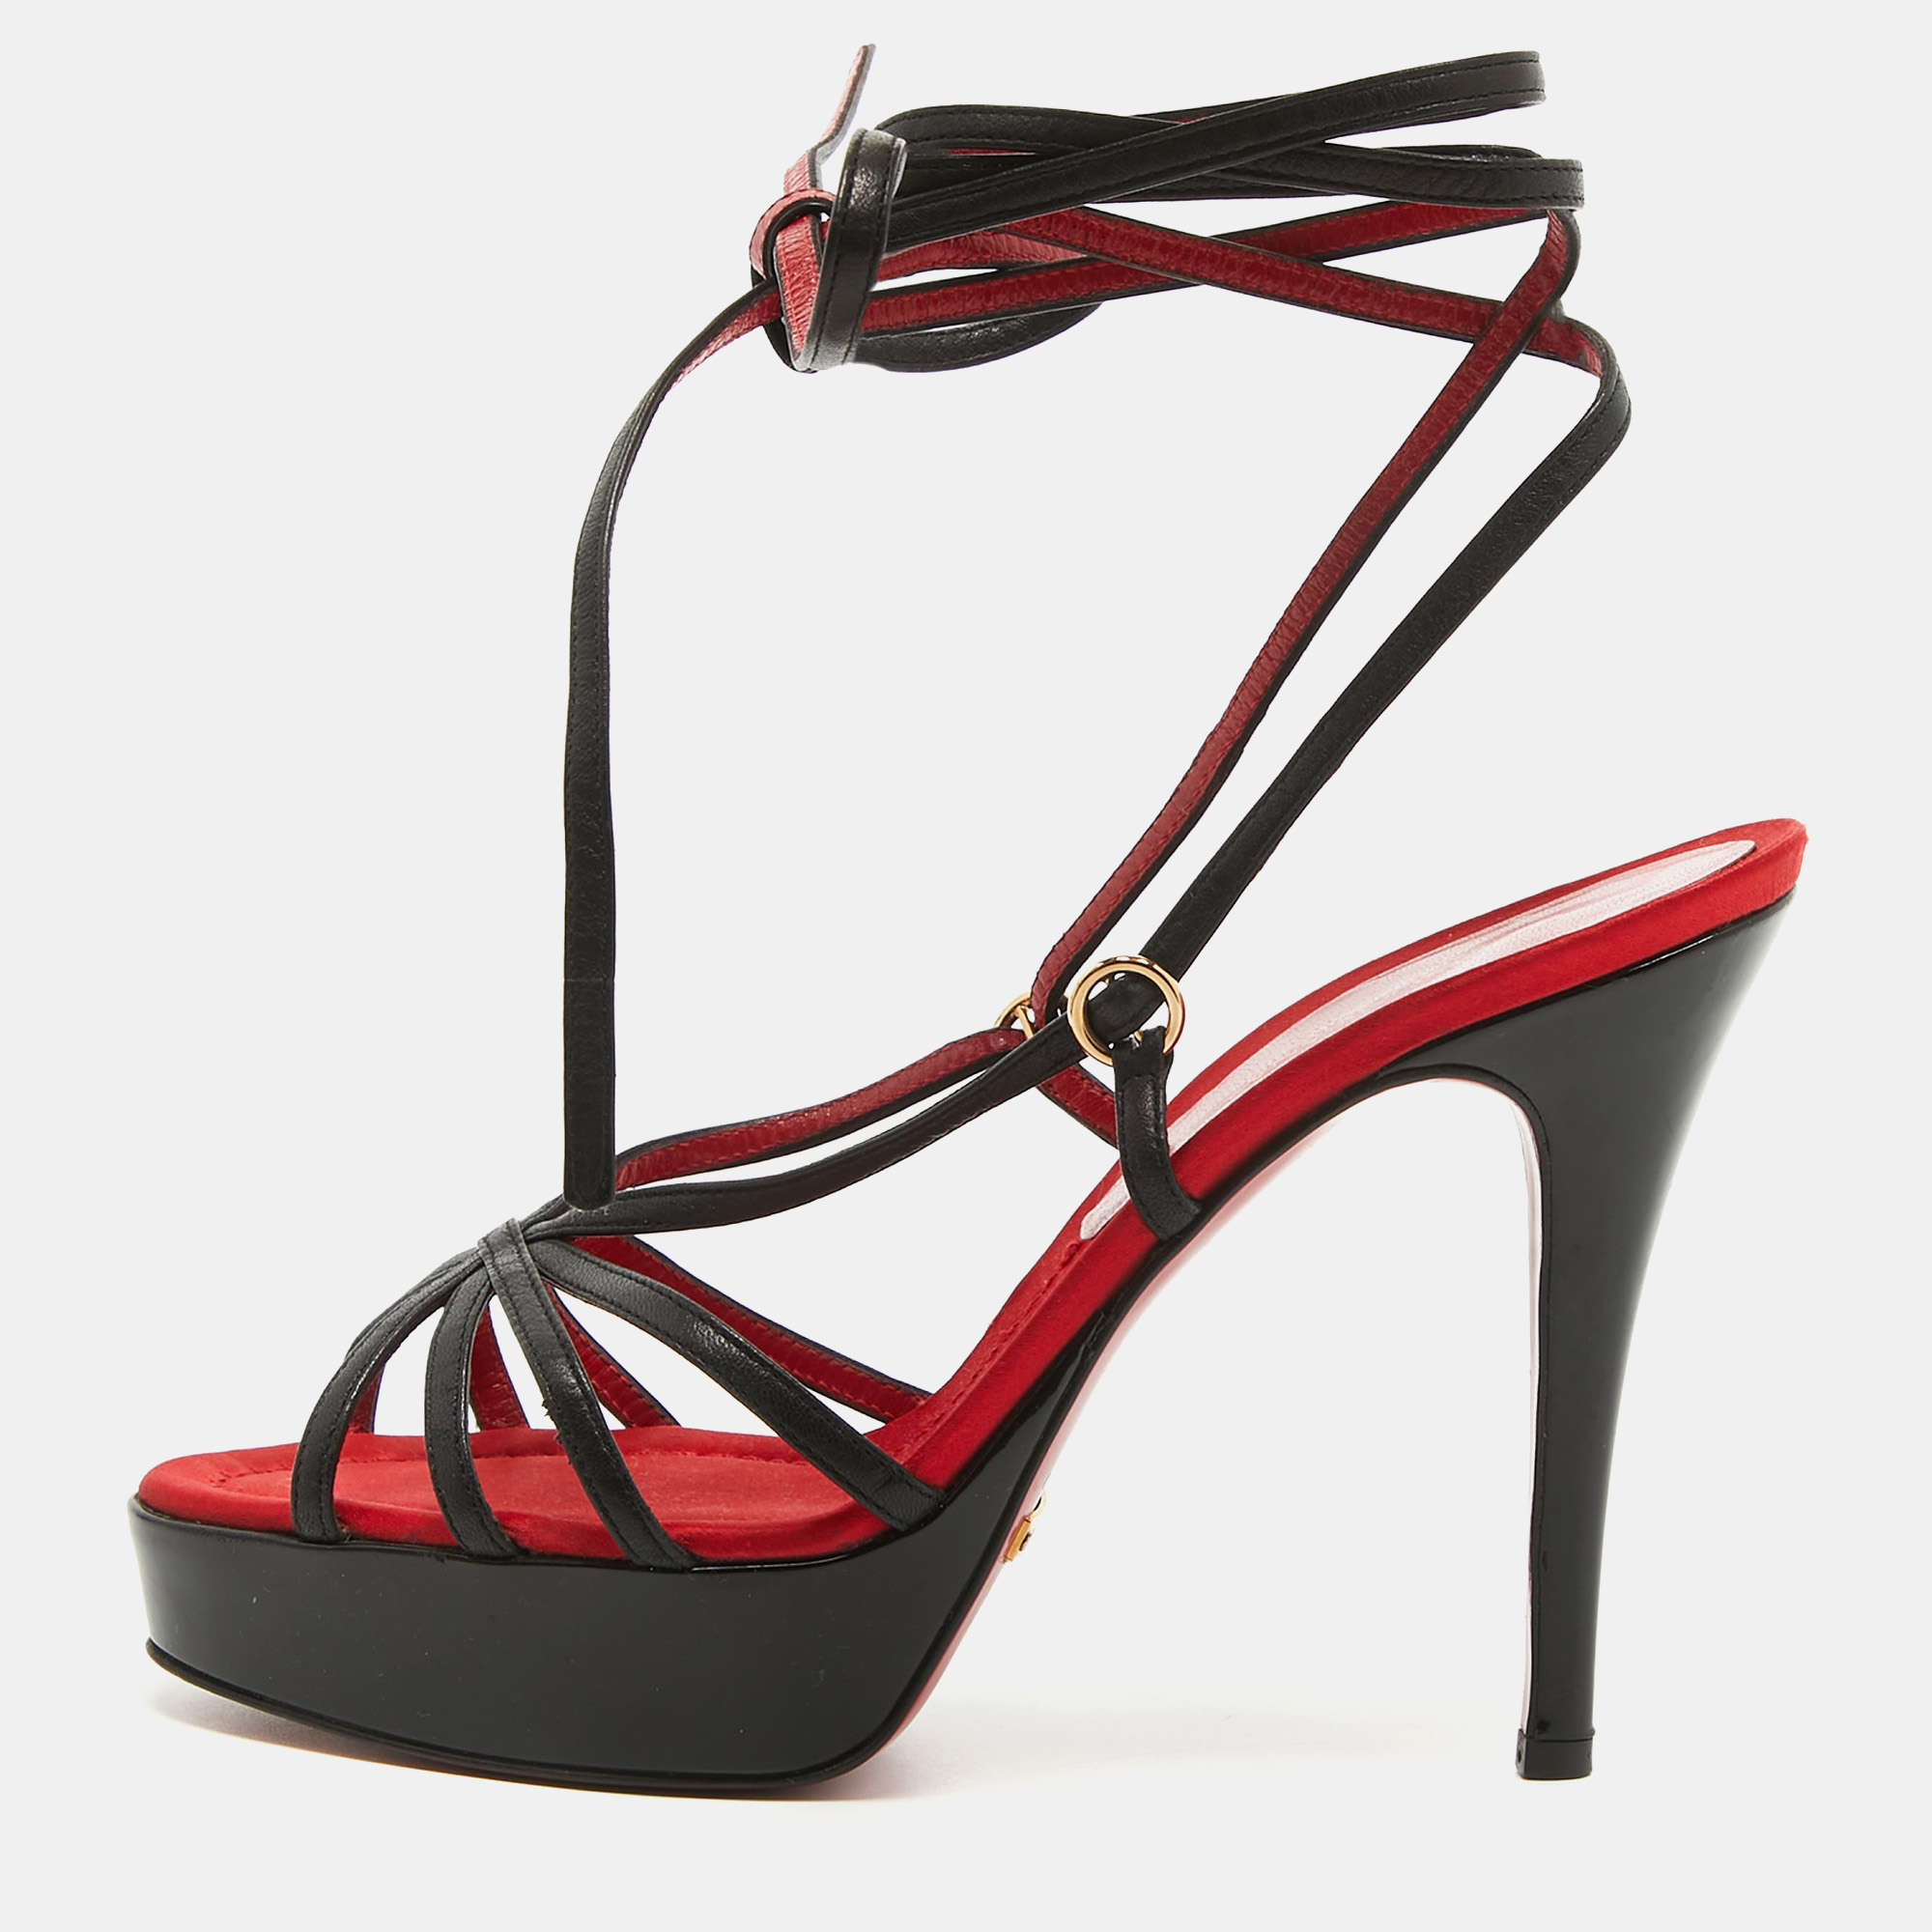 Dolce & gabbana red/black leather lace up sandals size 38